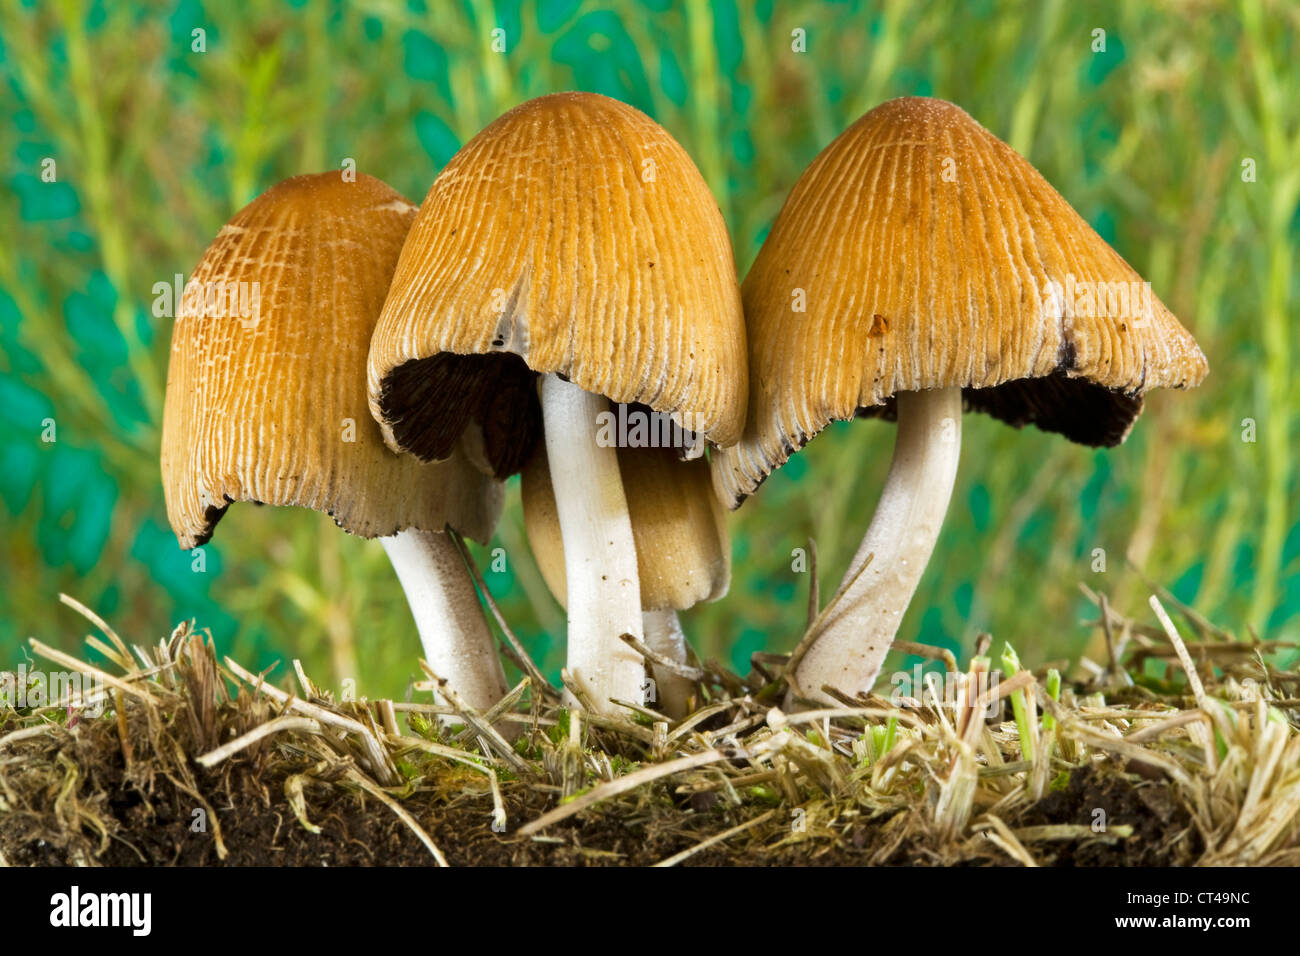 Common lawn mushrooms found in the Pacific Northwest Stock Photo